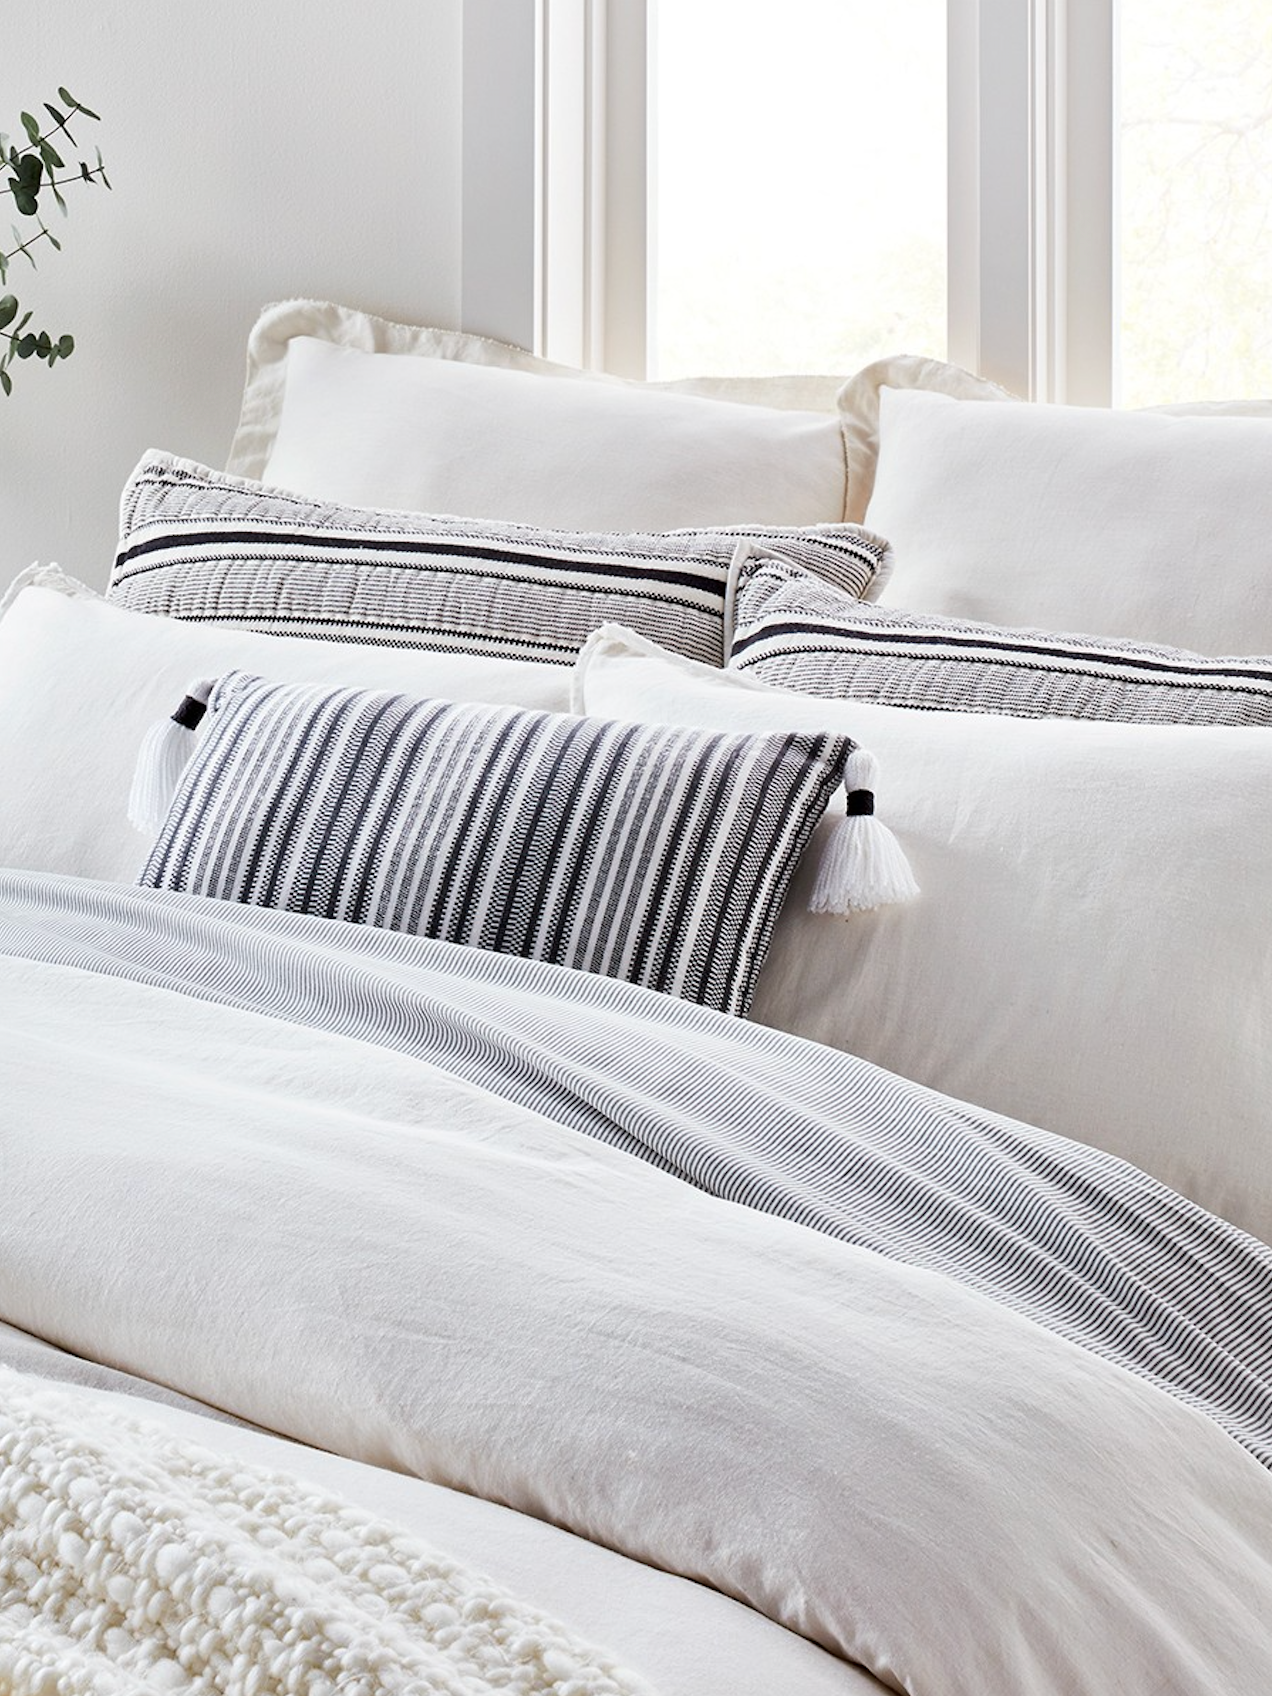 Refresh Those Linens: Chip and Jo Have Released a Bedding Collection